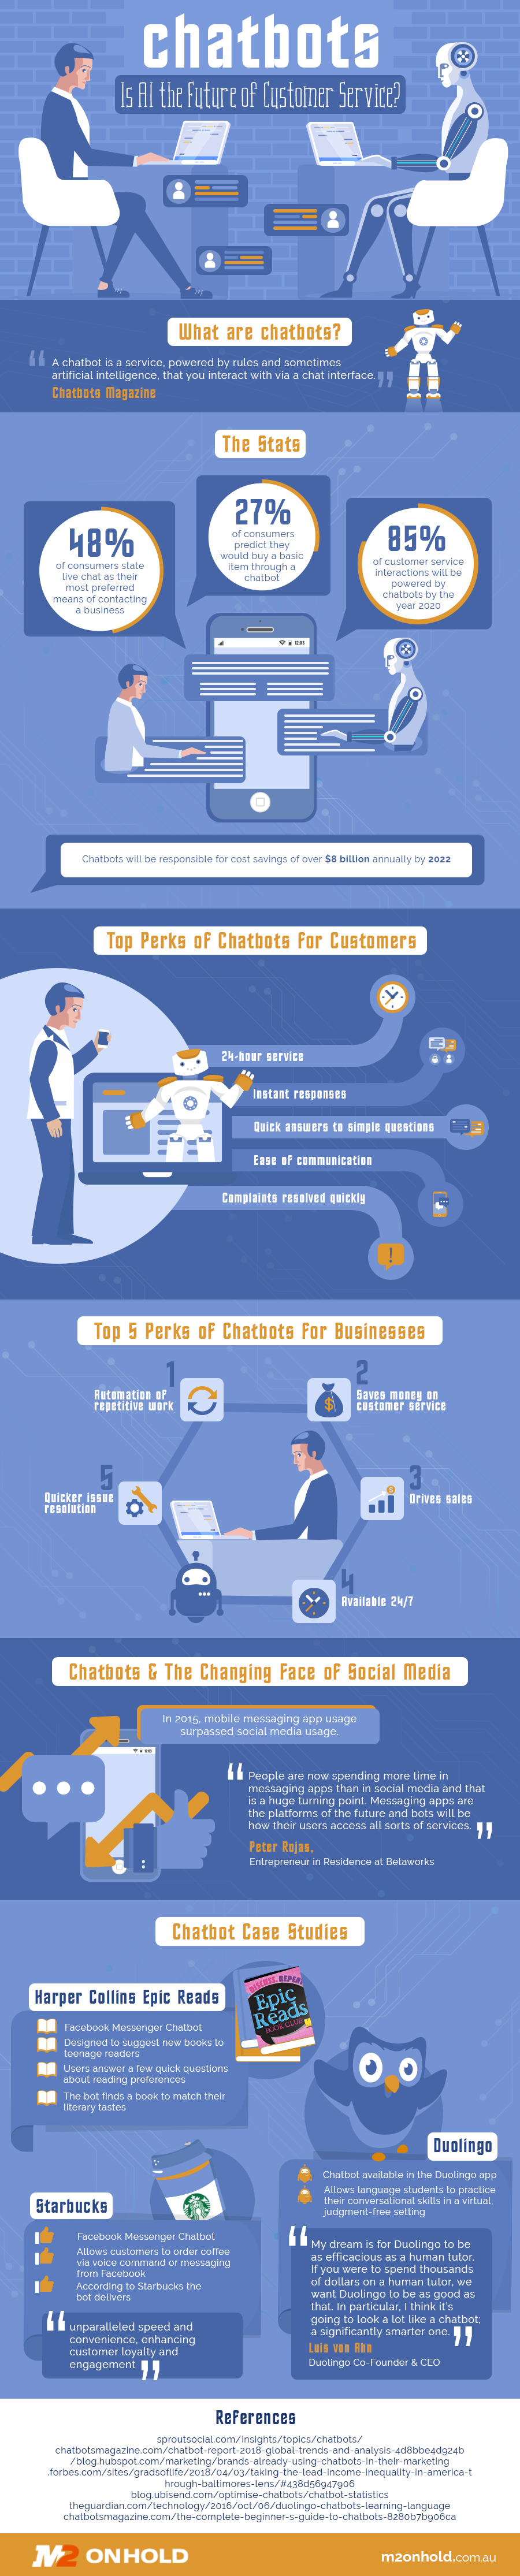 Chatbots: Is AI The Future Of Customer Service? - Infographic 